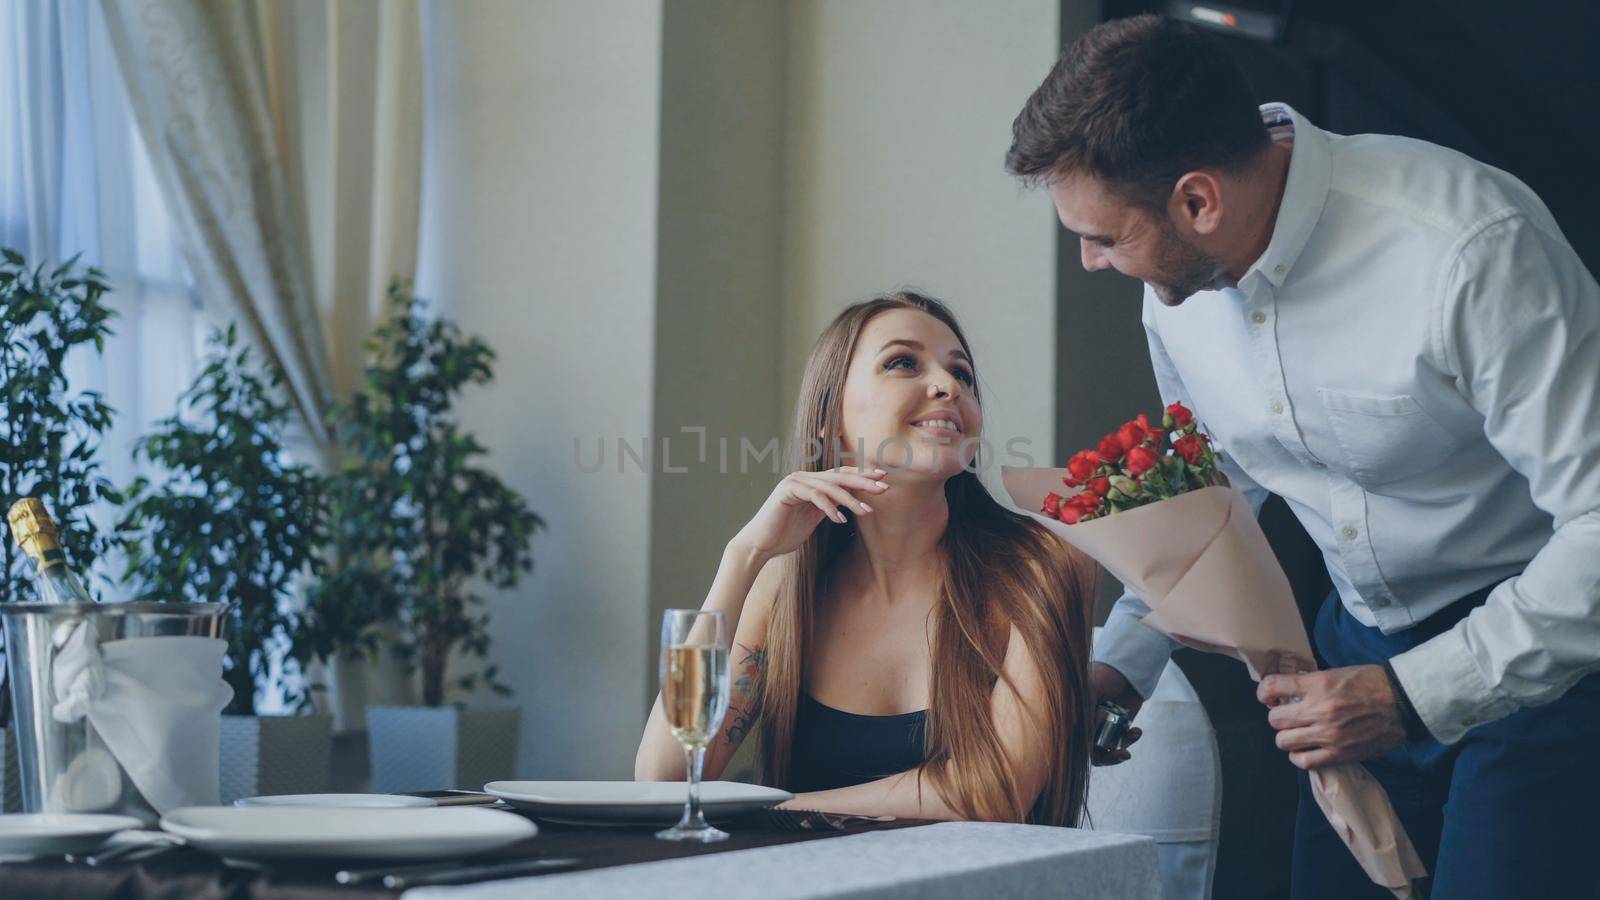 Happy girlfriend is getting flowers and present from her loving boyfriend after waiting for him alone in restaurant. Romantic relationship, gifts and fine dining concept.